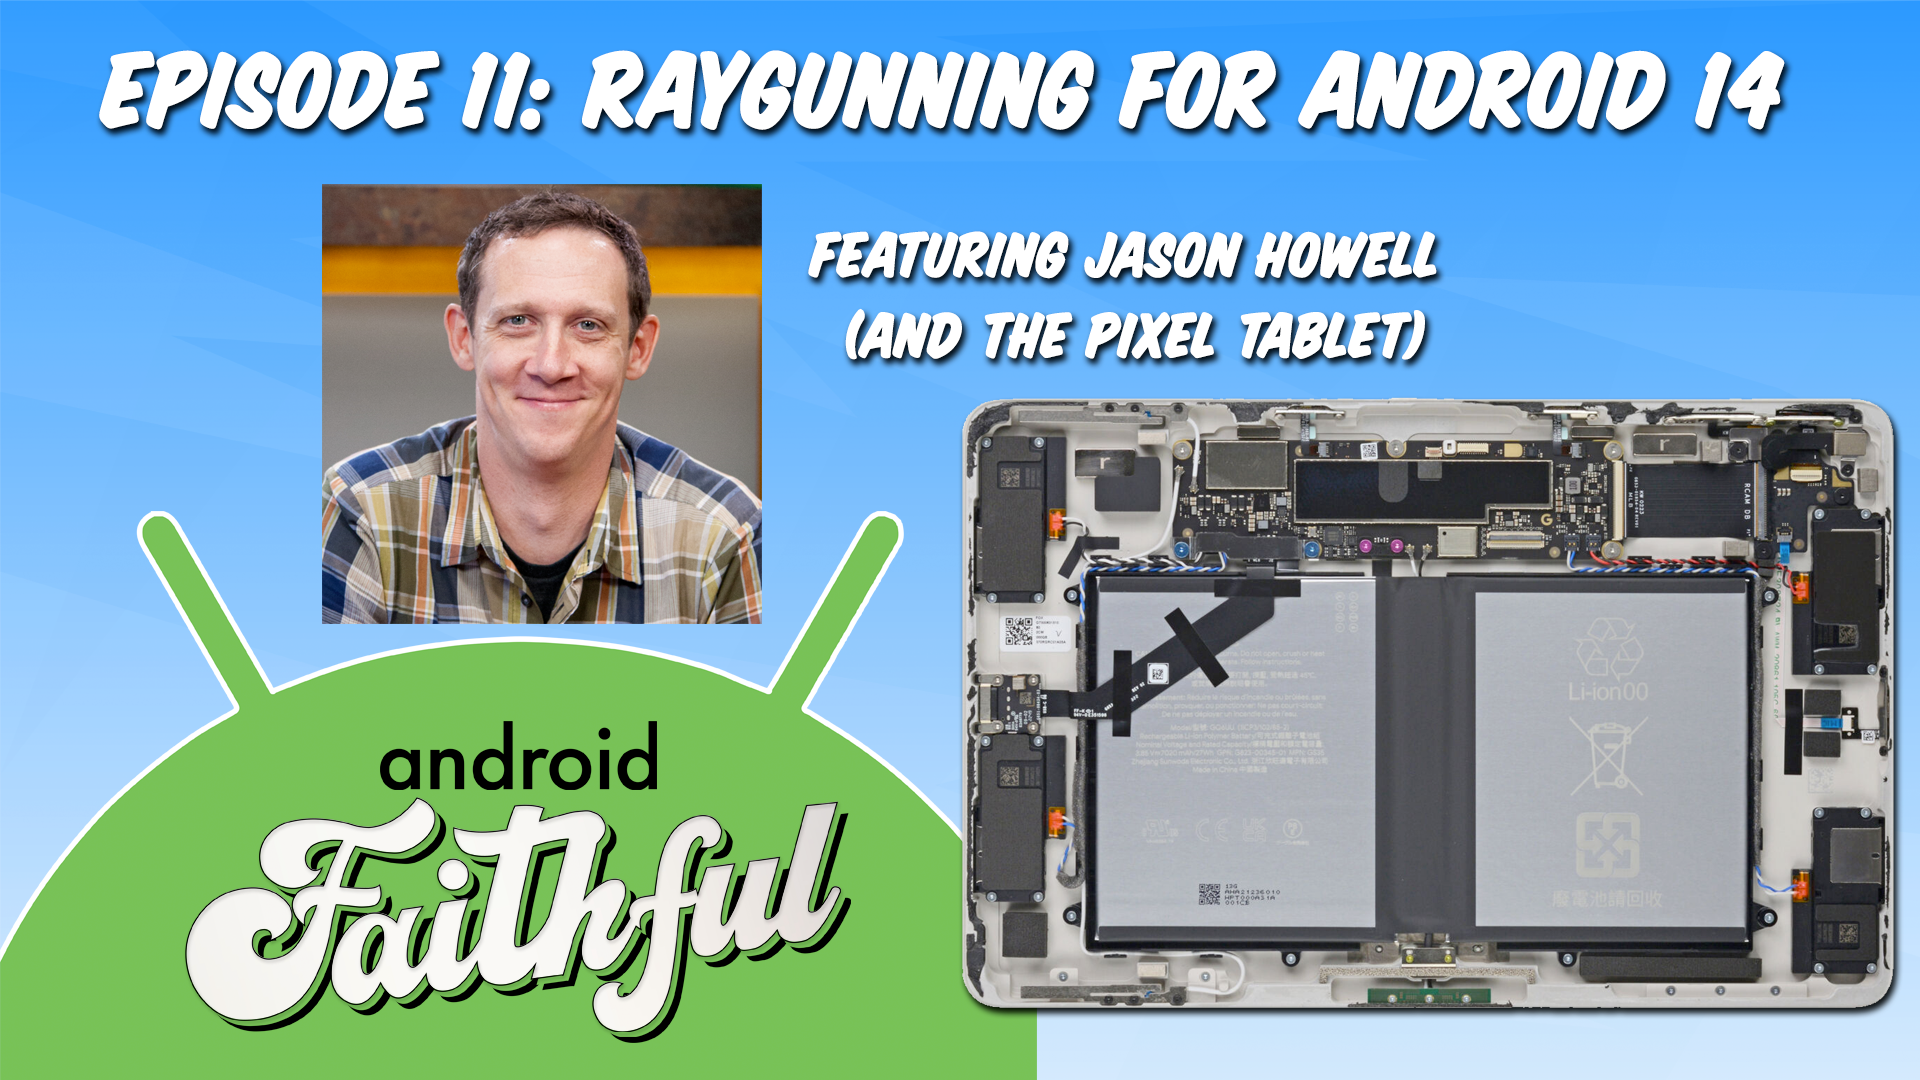 Raygunning For Android 14 - Android Faithful Episode #11